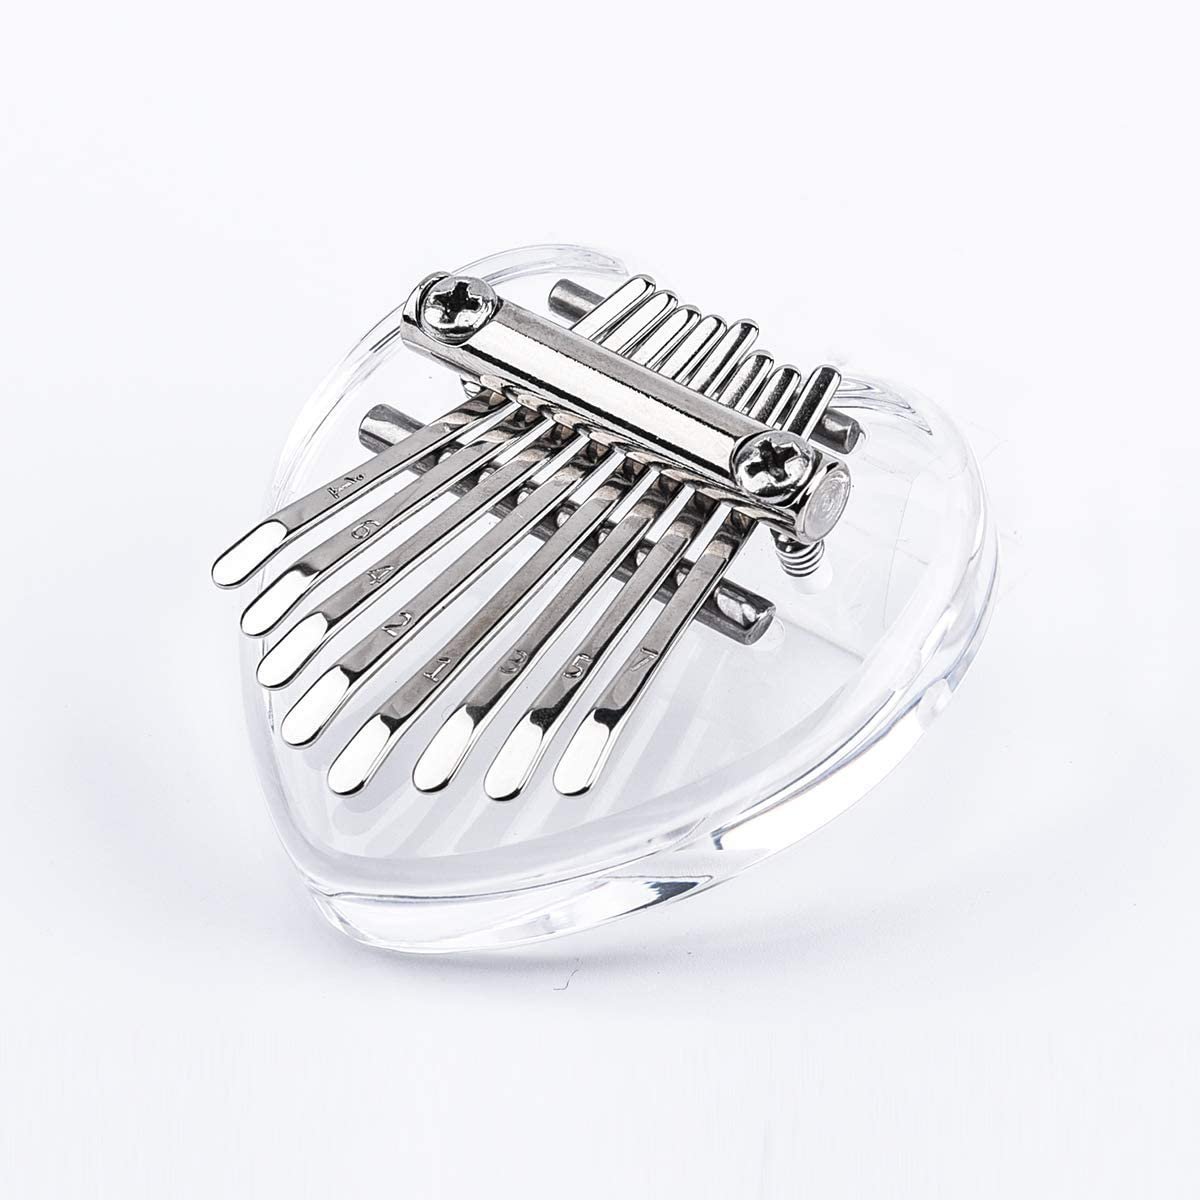 (🌲EARLY CHRISTMAS SALE - 50% OFF) 🎁Kalimba 8 Key exquisite Finger Thumb Piano💕, Buy 2 Free Shipping Only Today